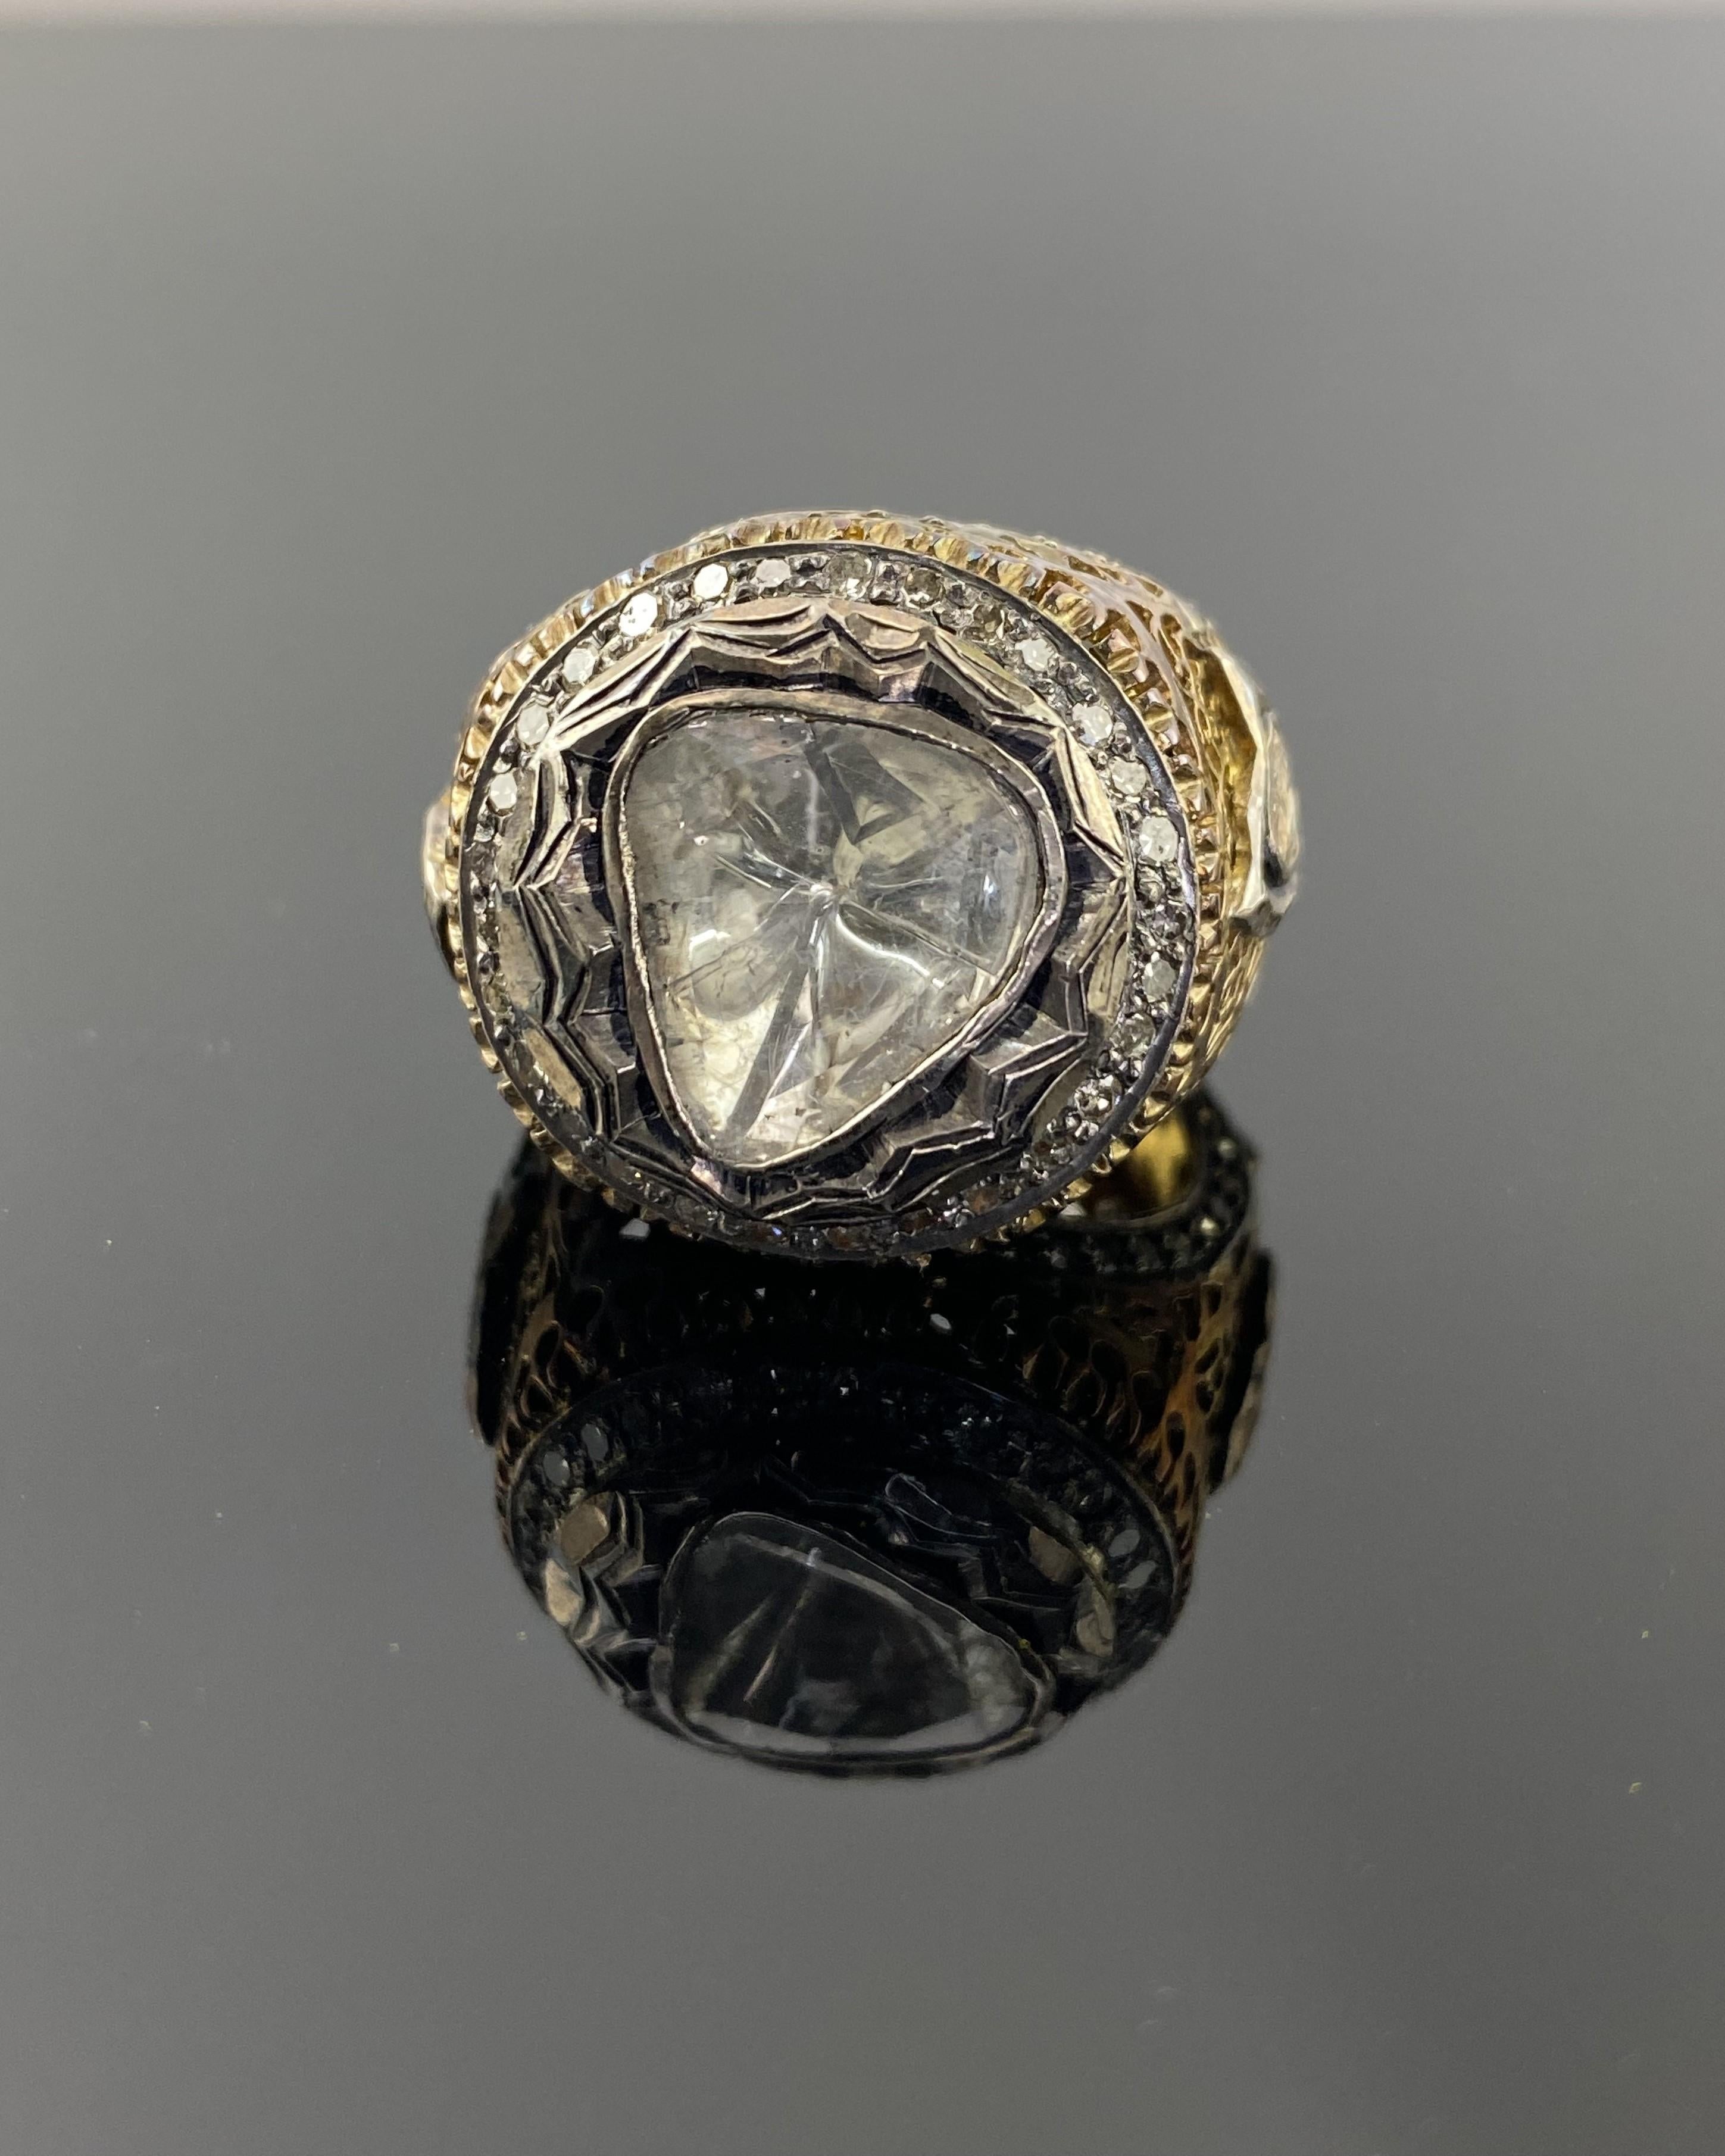 An intricate, hand made, rose cut center stone and full cut Diamond ring, set in 18k gold and silver mix.
We accept returns, and provide free shipping. 
Please feel free to message us for more information. 